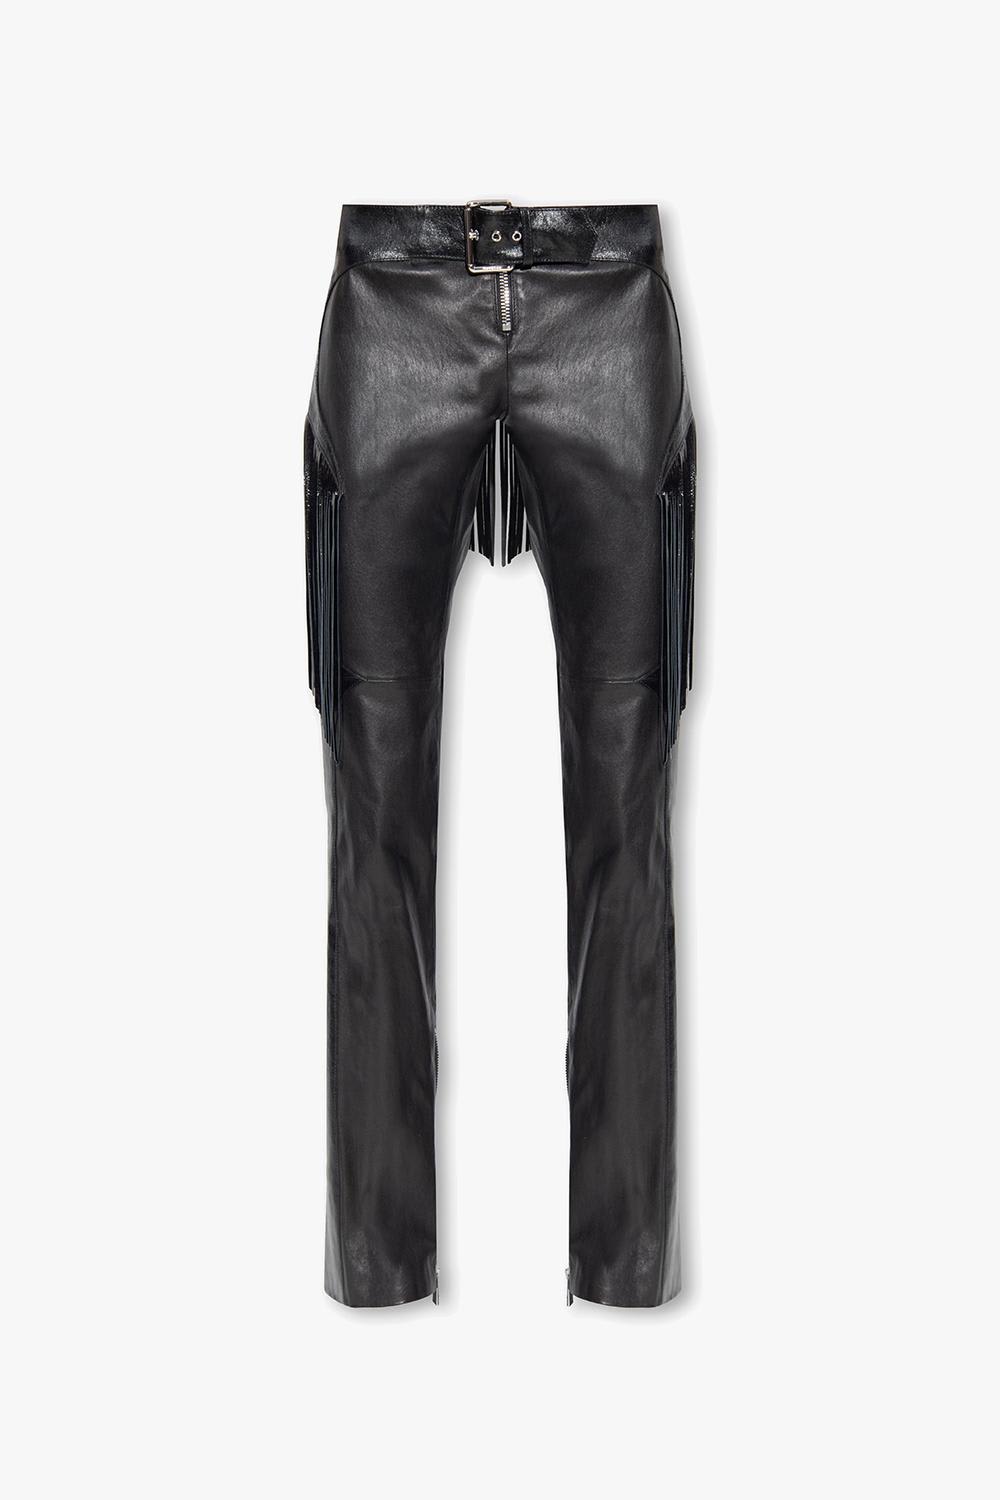 VERSACE LEATHER TROUSERS WITH FRINGES